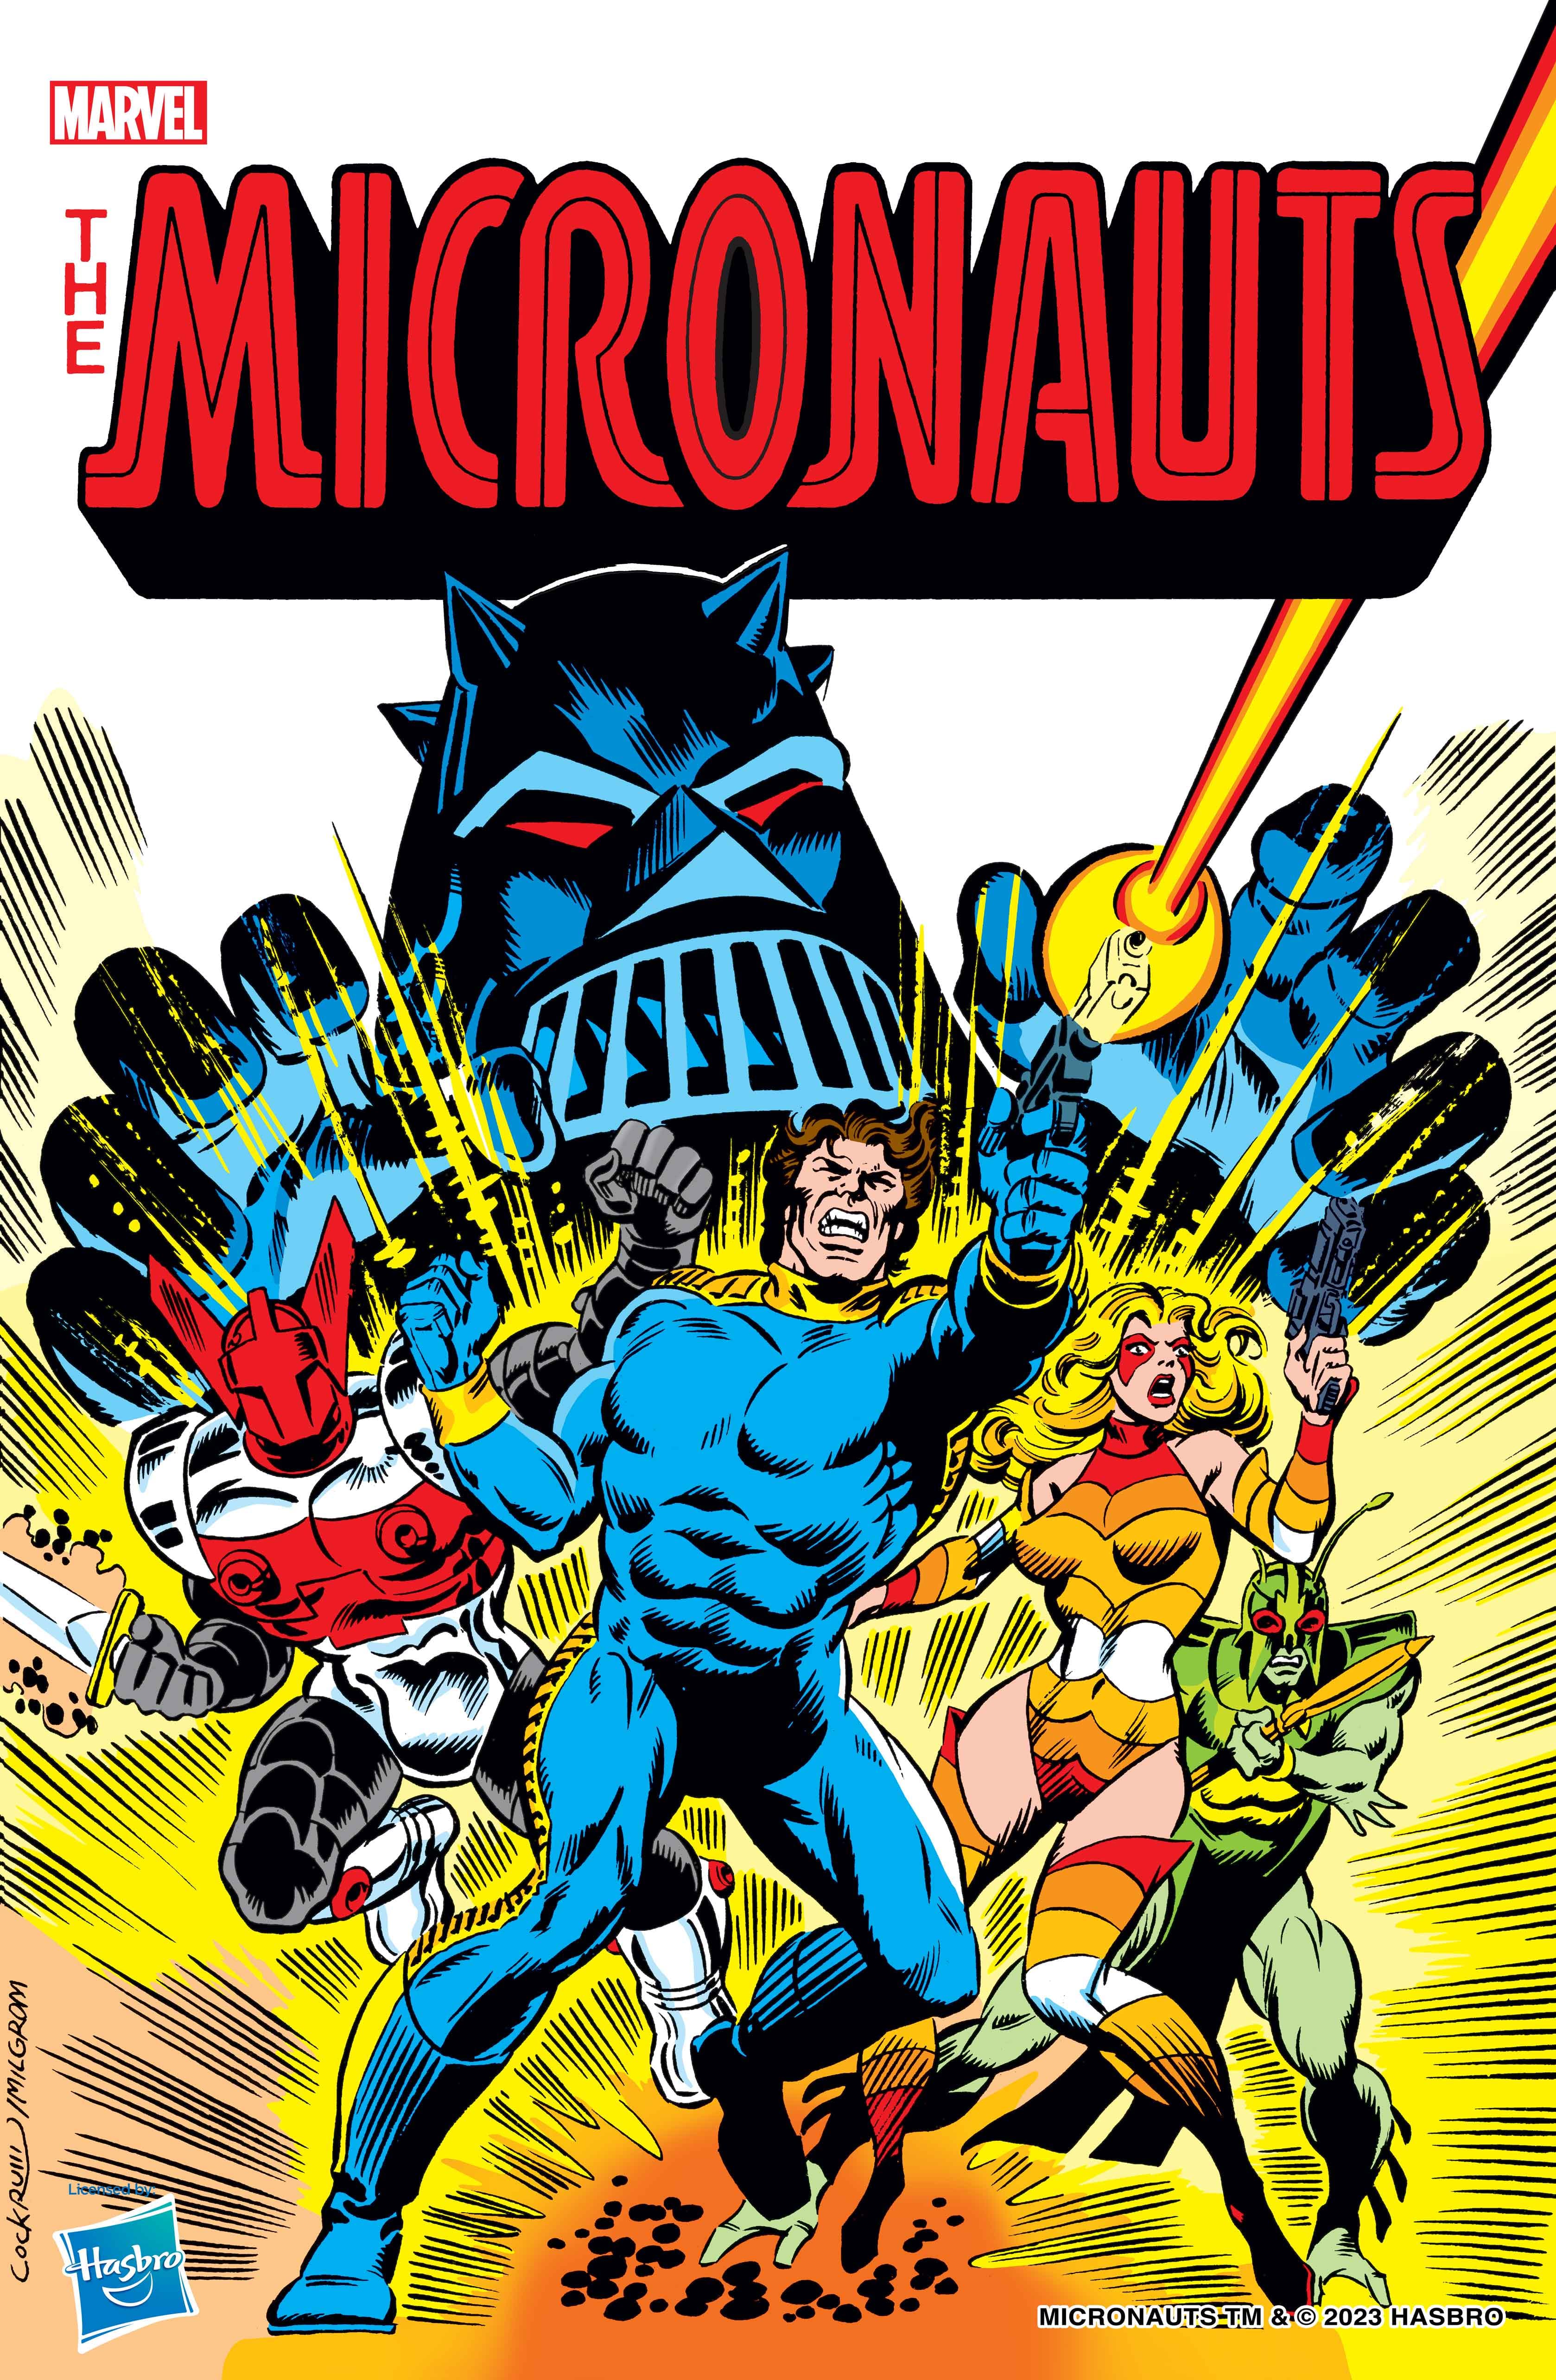 MICRONAUTS: THE ORIGINAL MARVEL YEARS OMNIBUS VOL. 1 COVER BY DAVE COCKRUM